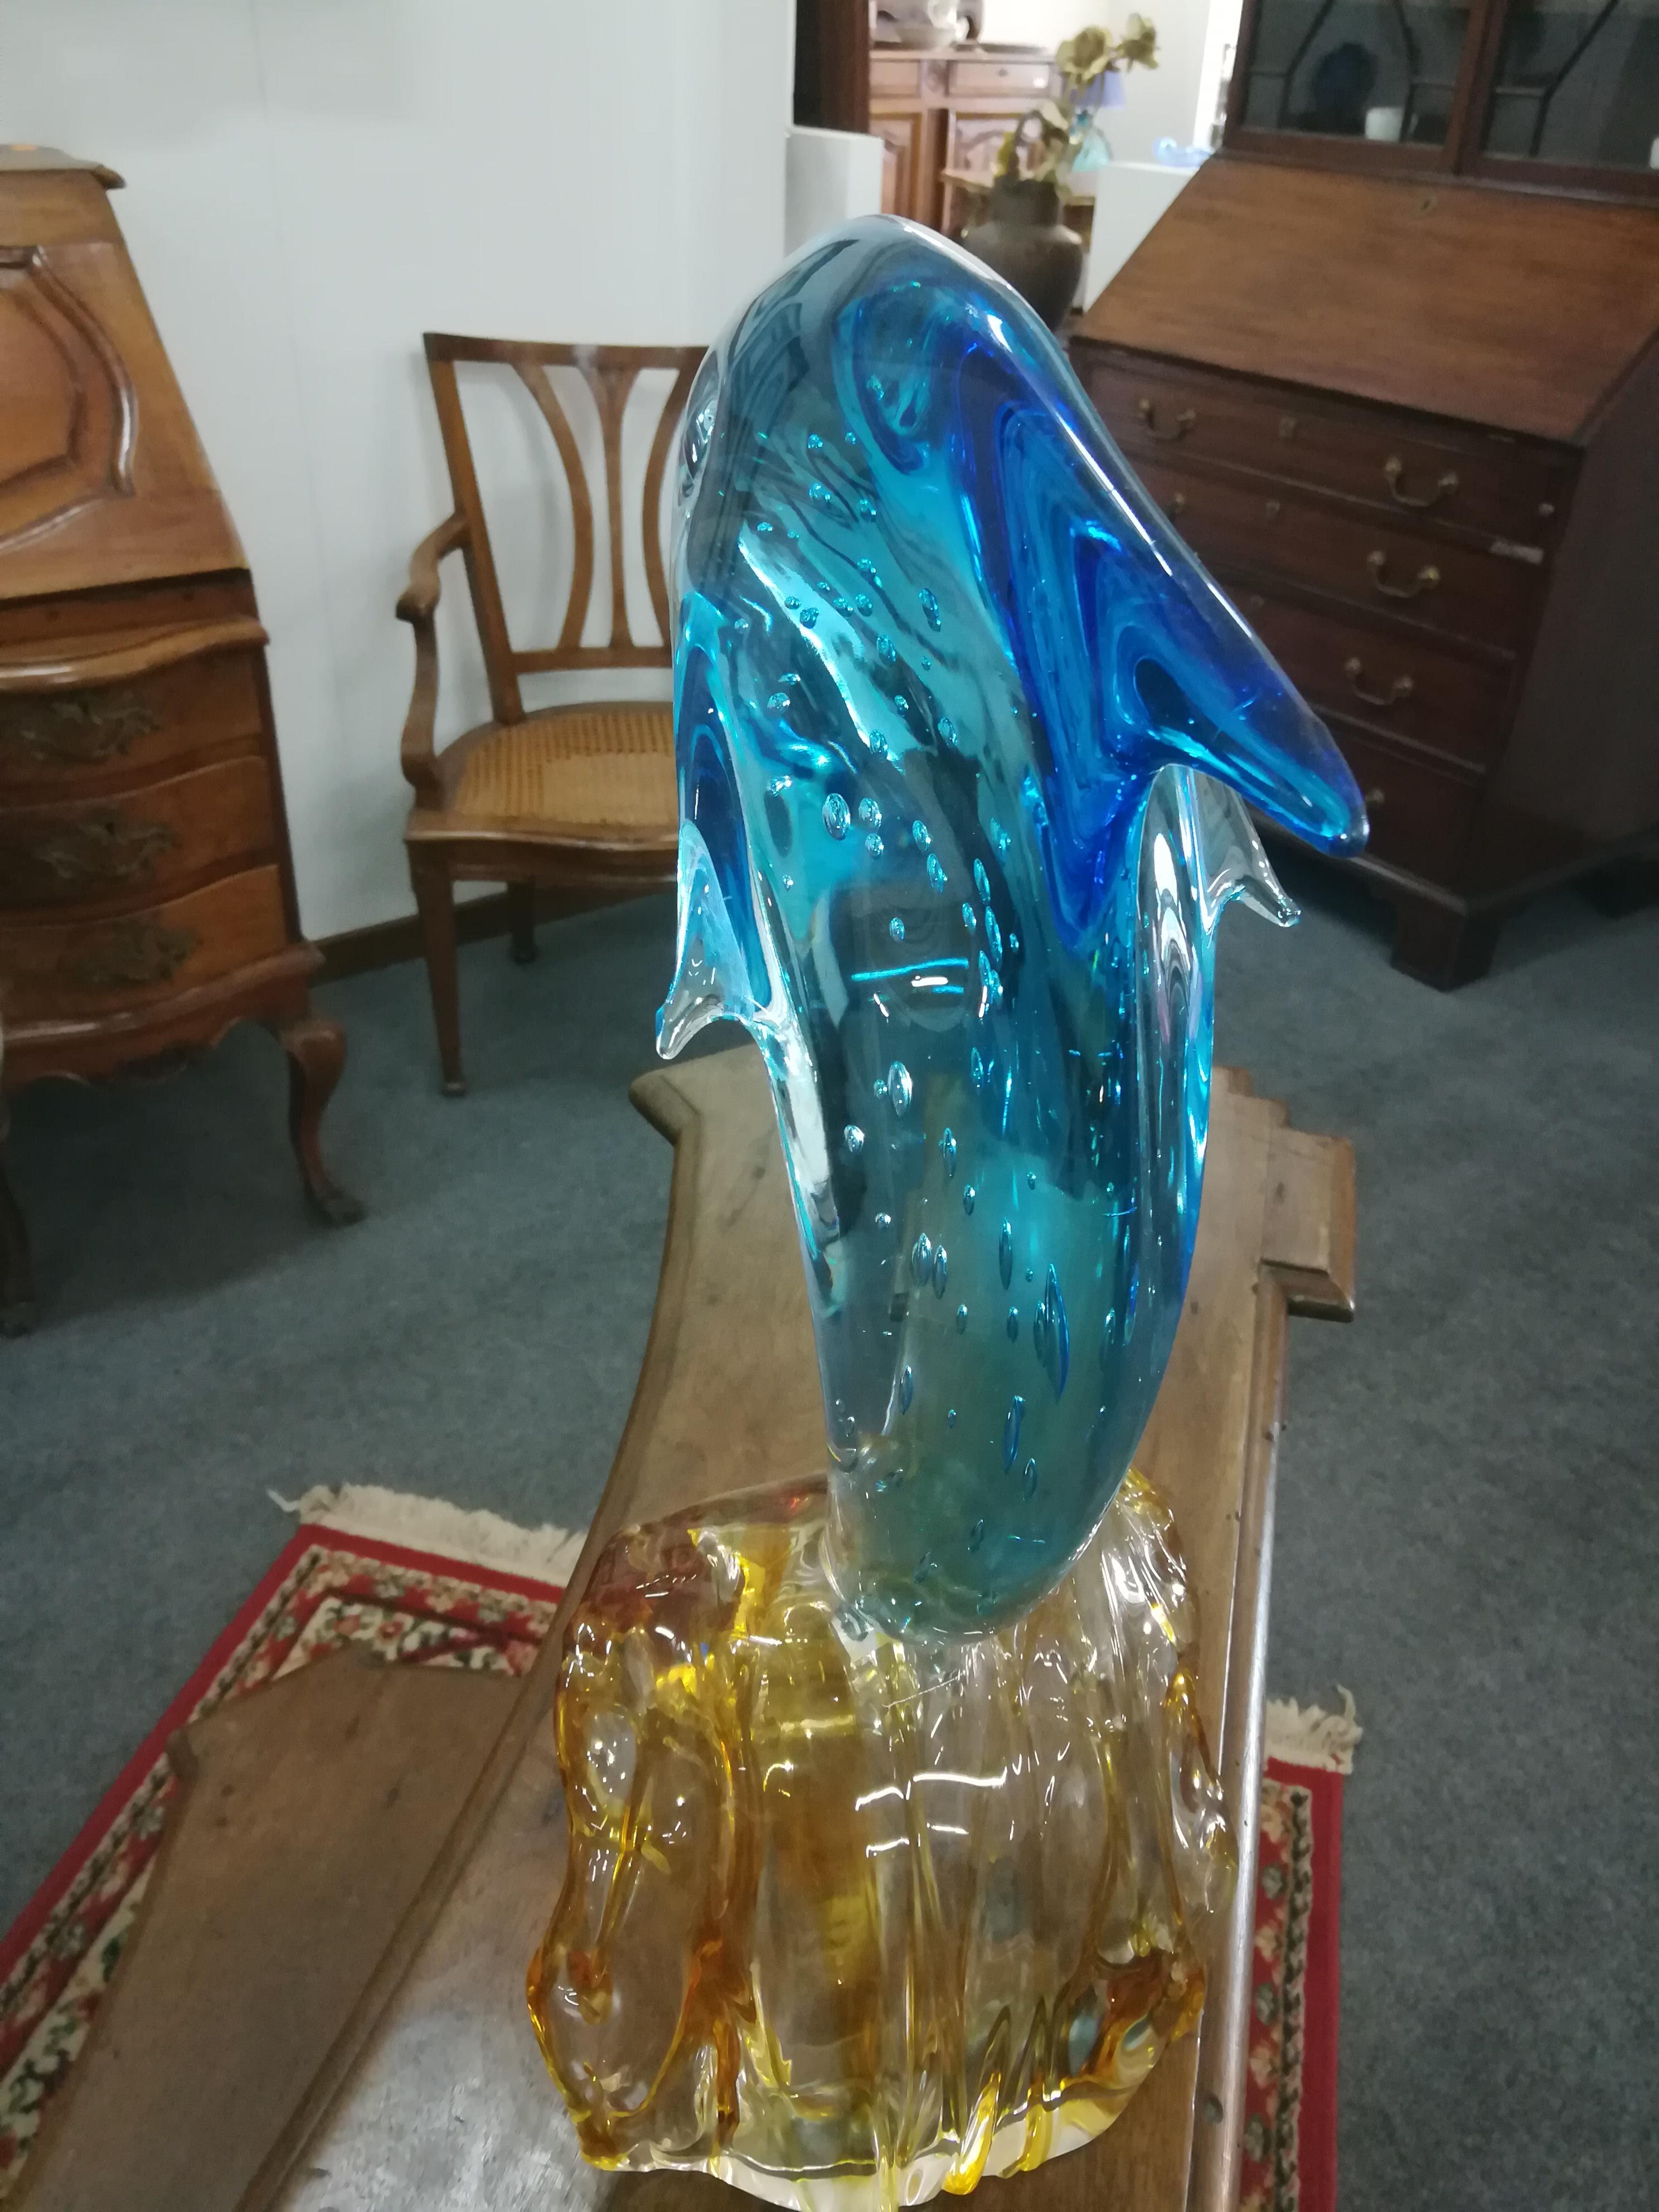 This is a Italian light blue glass dolphin sculpture made by the glass maker Sergio Costantini.
It remember the beauty of the ocean it is full of little bubbles inside made by the master blowing inside a special instrument.